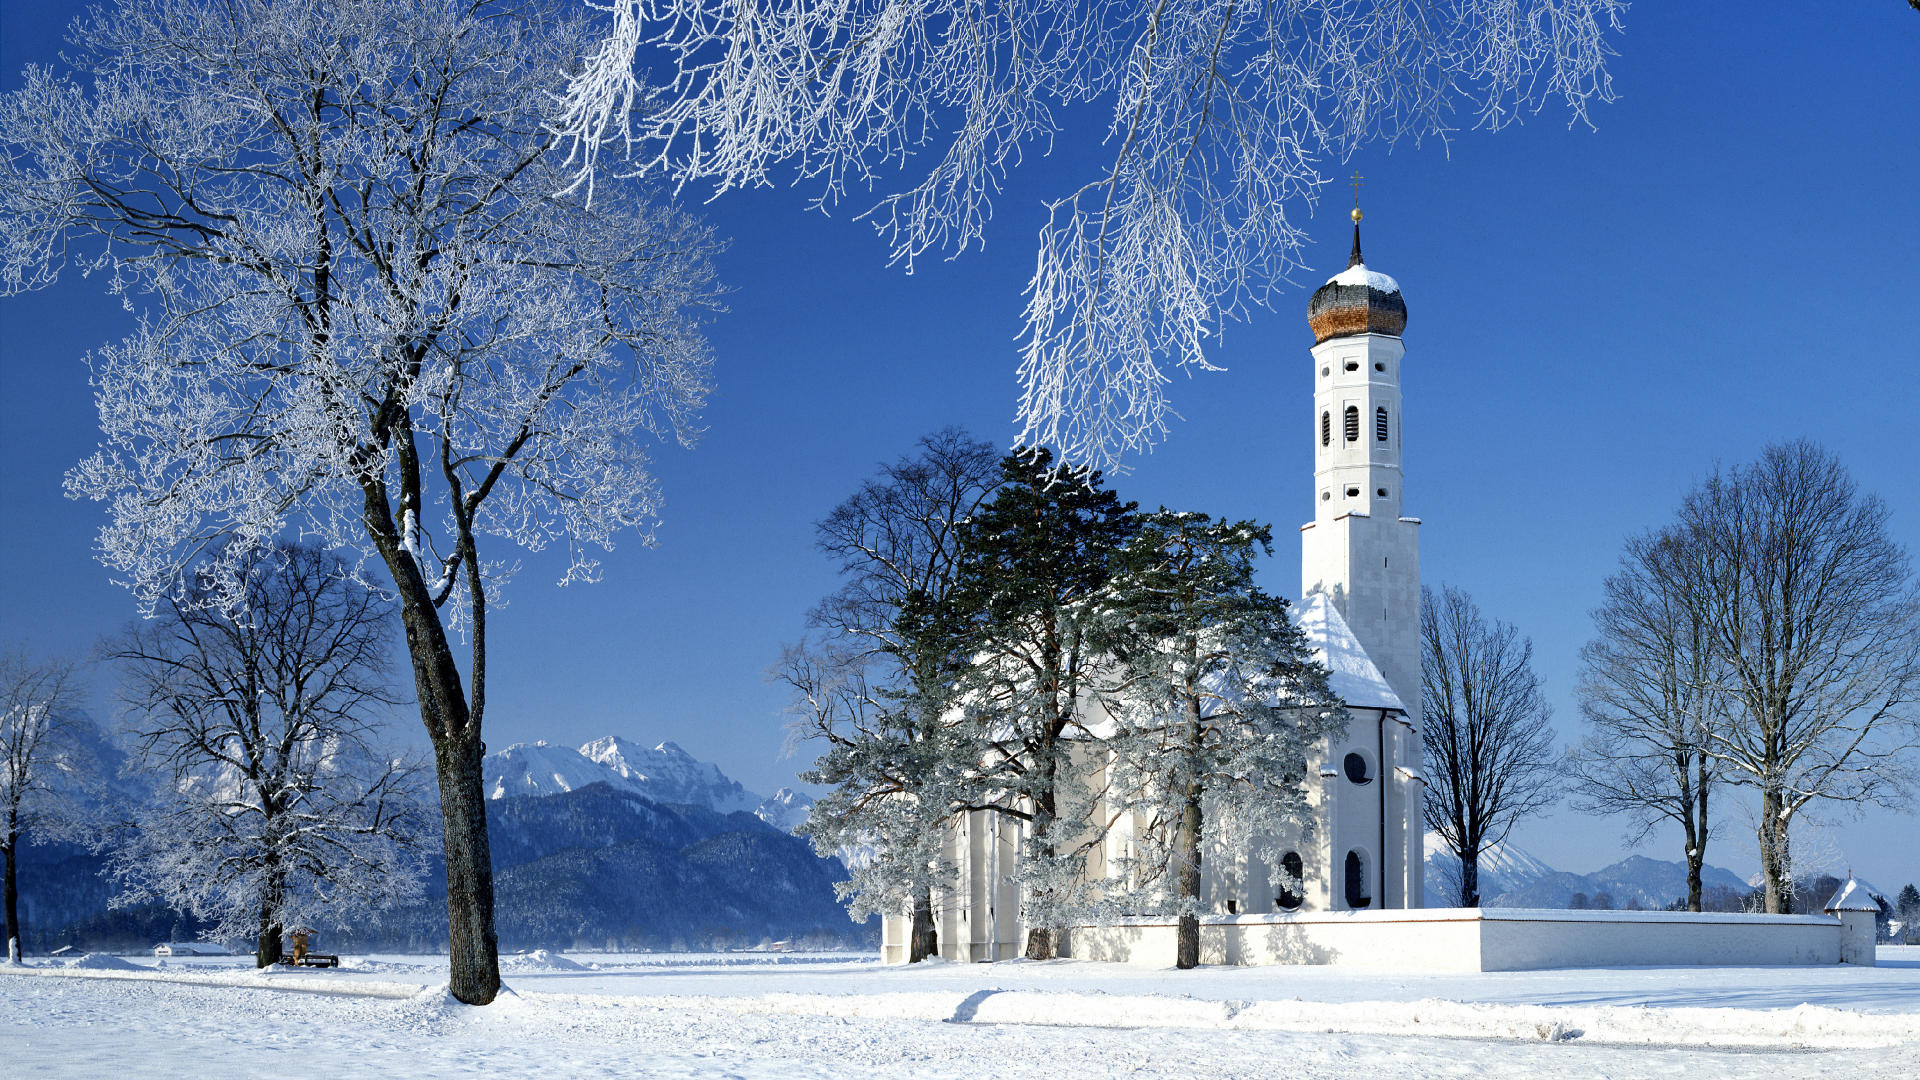 Winter HD Wallpapers   Wallpaper High Definition High Quality